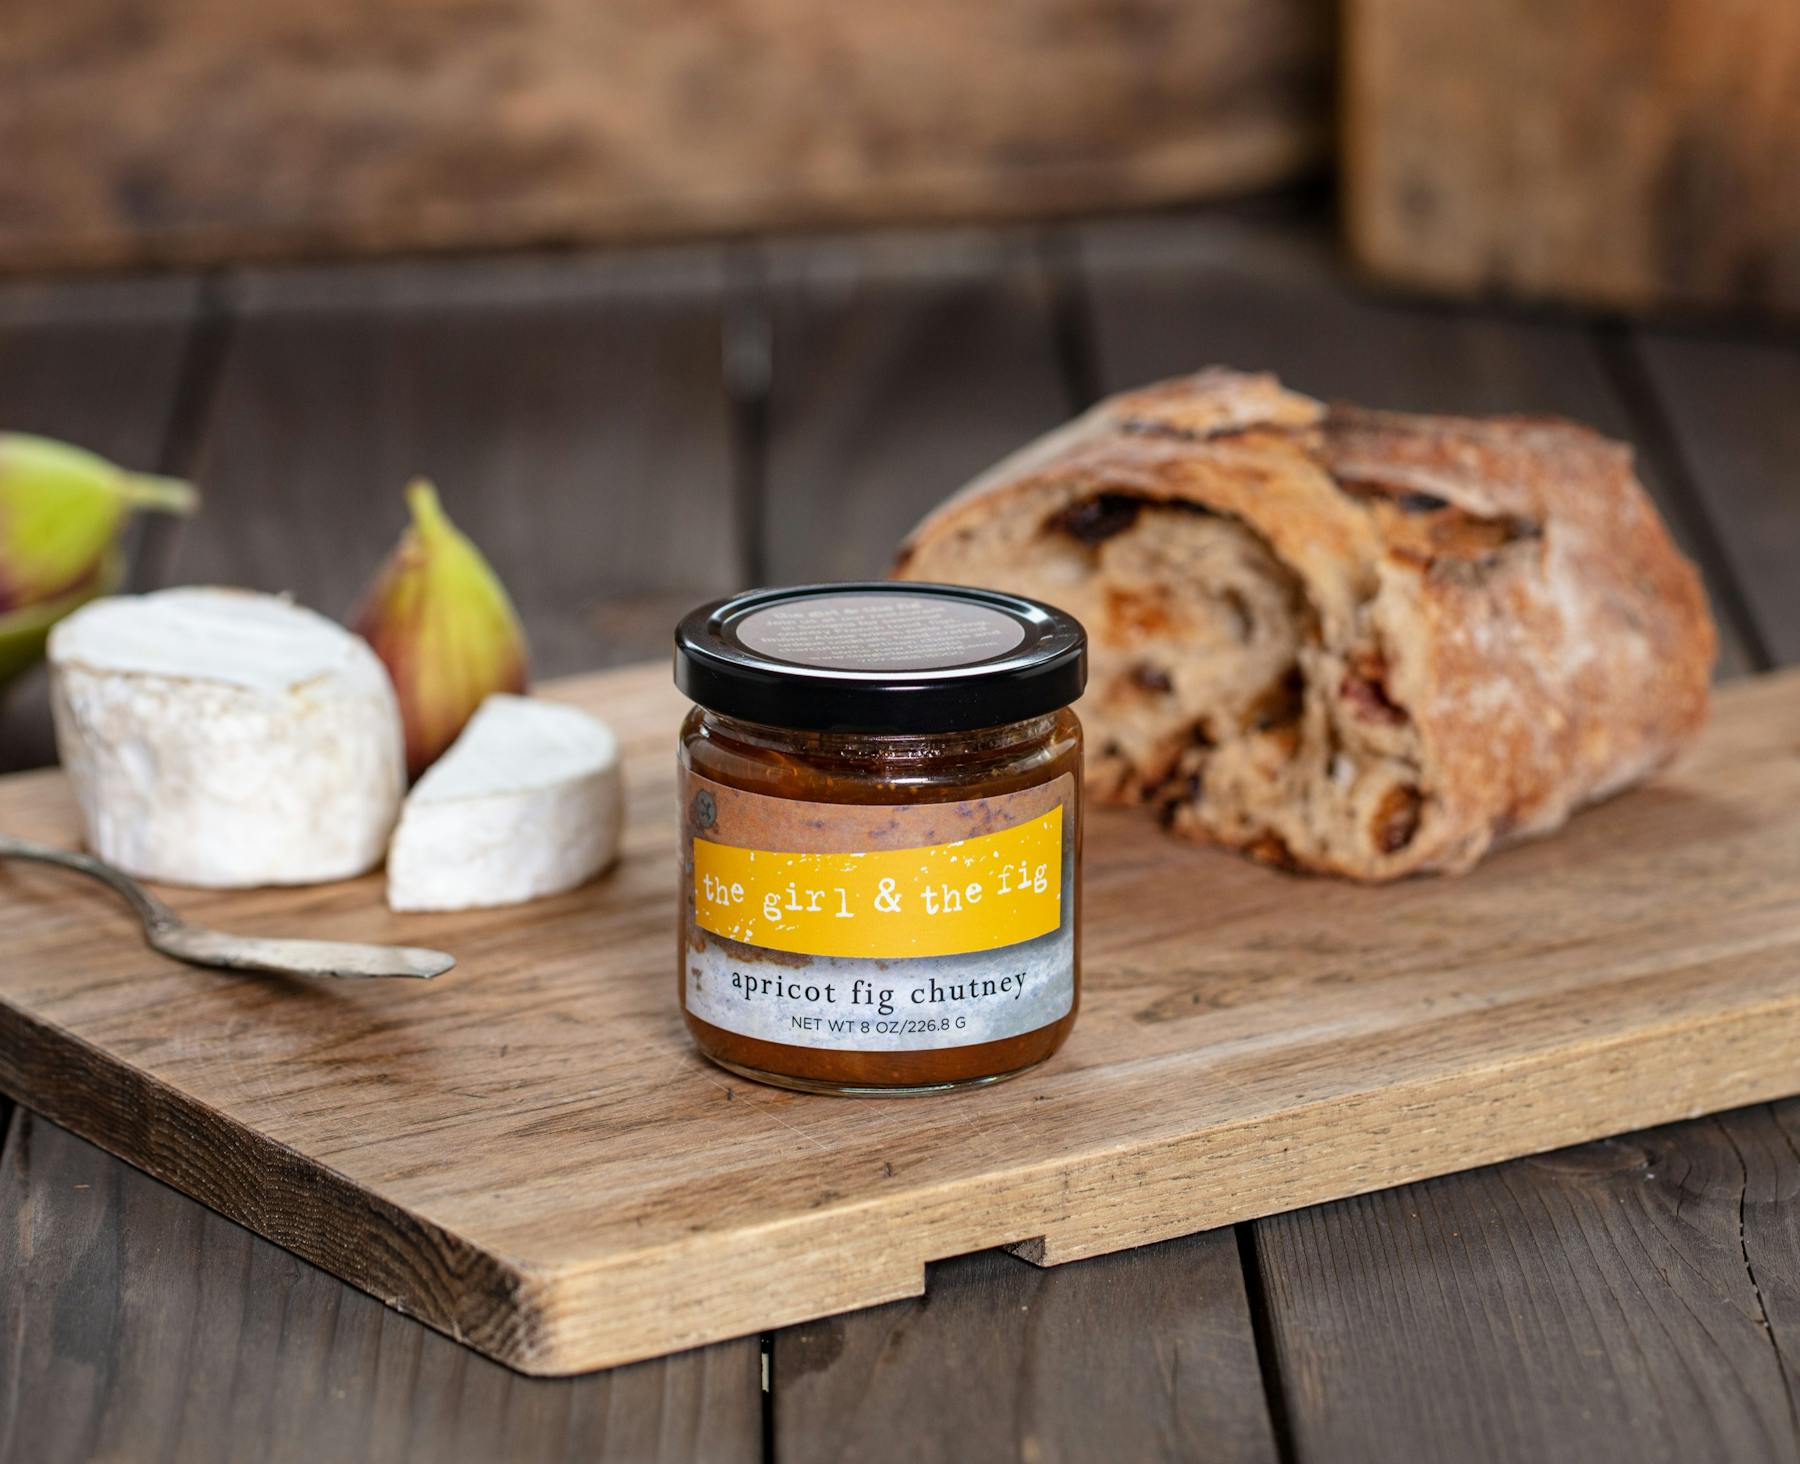 Apricot Fig Chutney, the girl & the fig